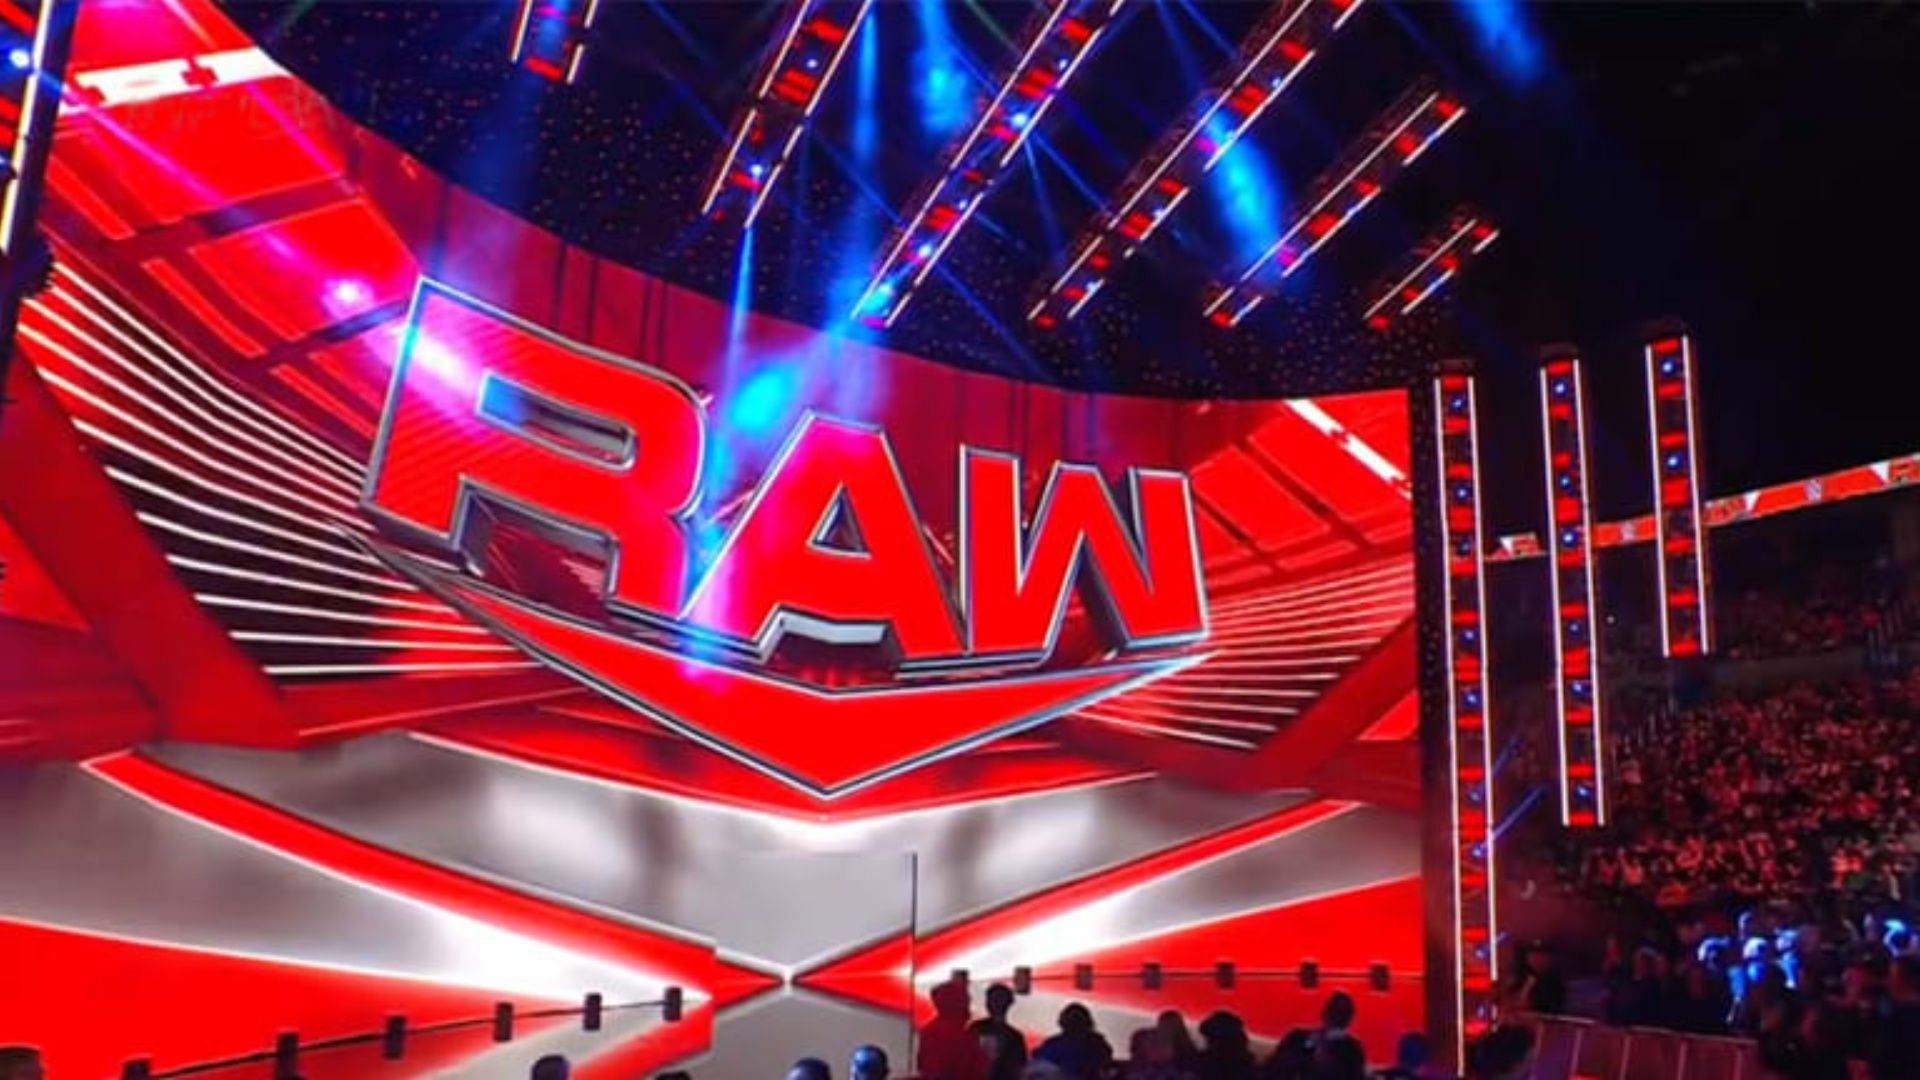 WWE RAW will emanate from Rocket Mortgage Fieldhouse in Cleveland, Ohio.